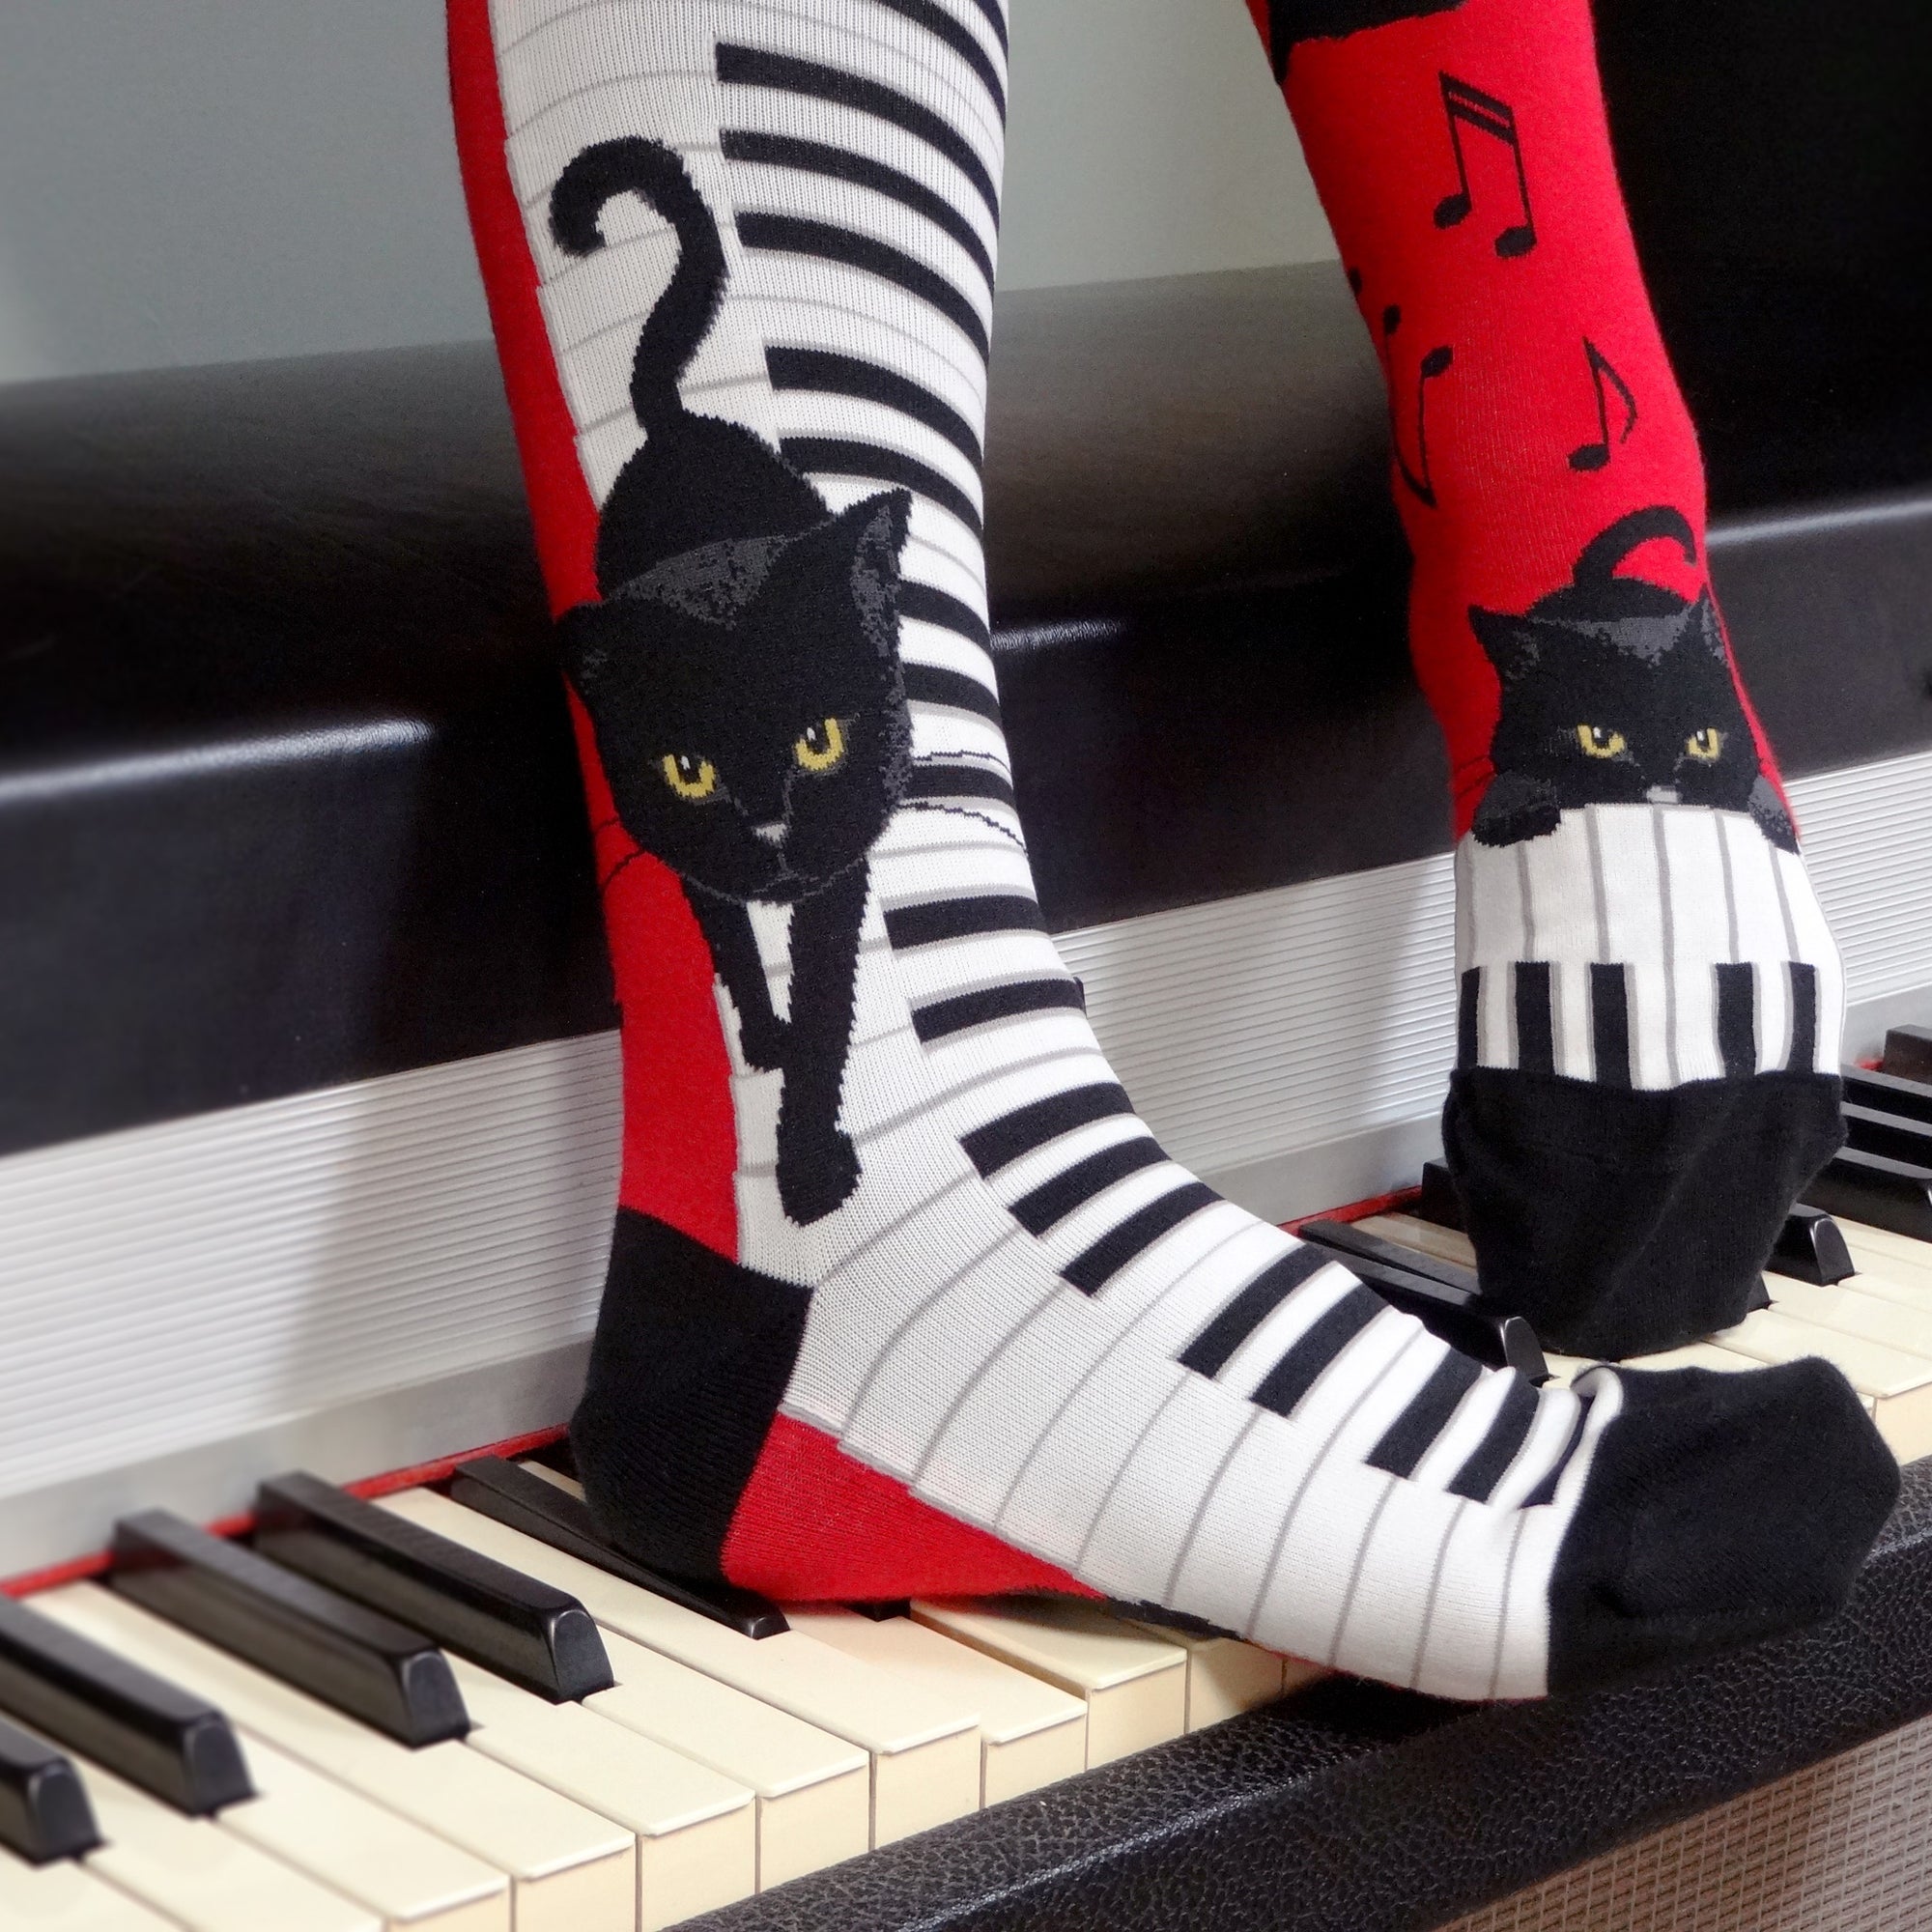 On these red knee highs with a black heel and toe are cute black cats with orange eyes prancing and playing on white and black piano keys with black music notes floating around them. In our Cat Socks collection you can find tons of cute cat socks! 